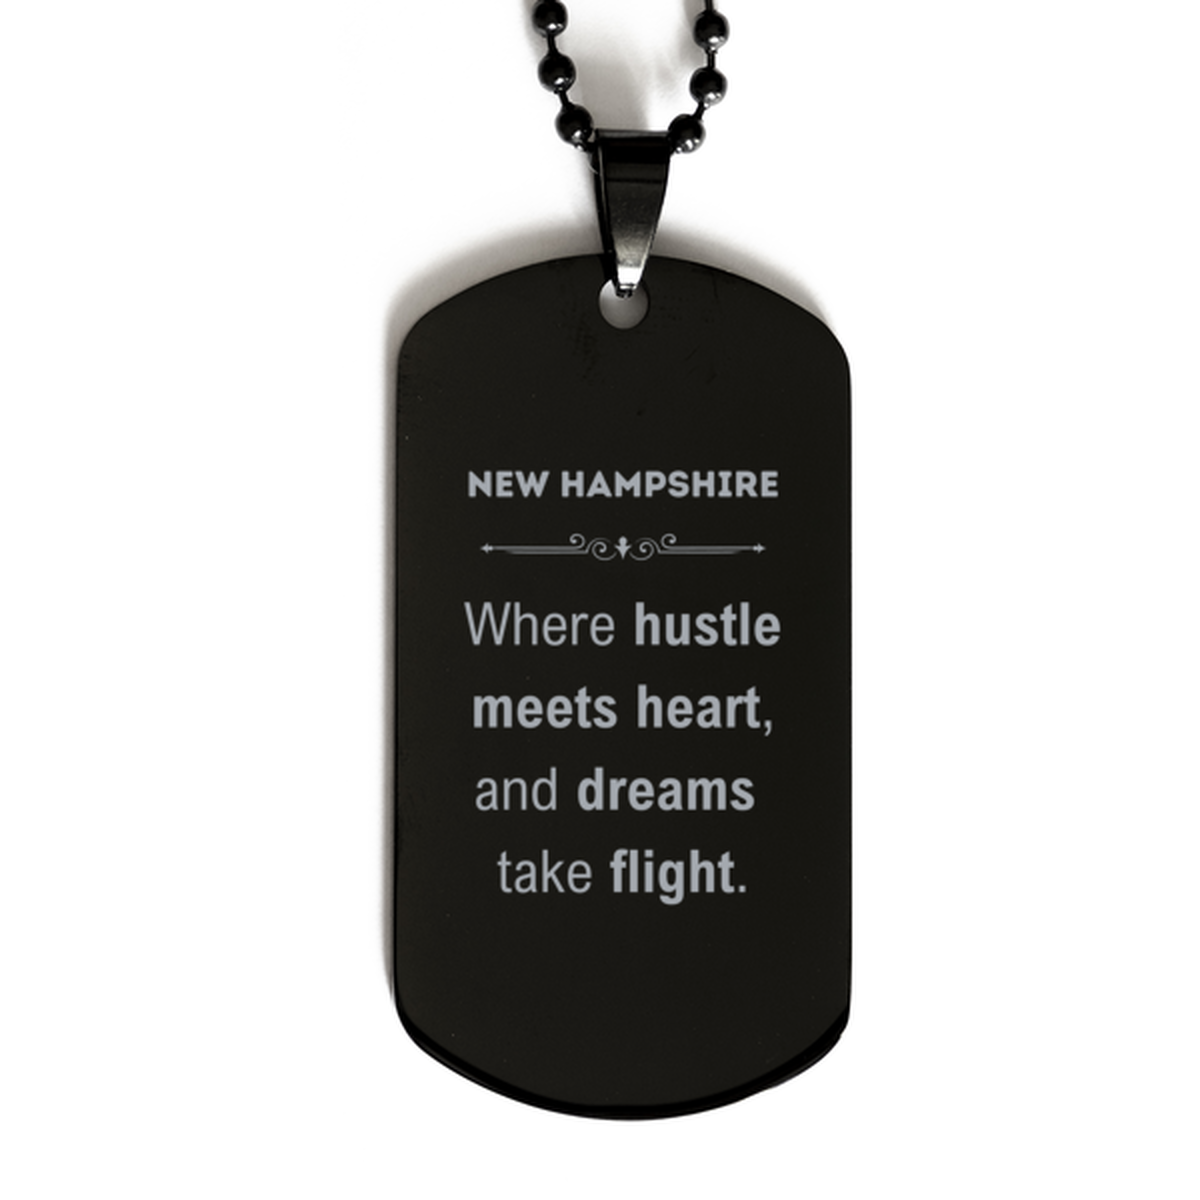 New Hampshire: Where hustle meets heart, and dreams take flight, New Hampshire Gifts, Proud New Hampshire Christmas Birthday New Hampshire Black Dog Tag, New Hampshire State People, Men, Women, Friends